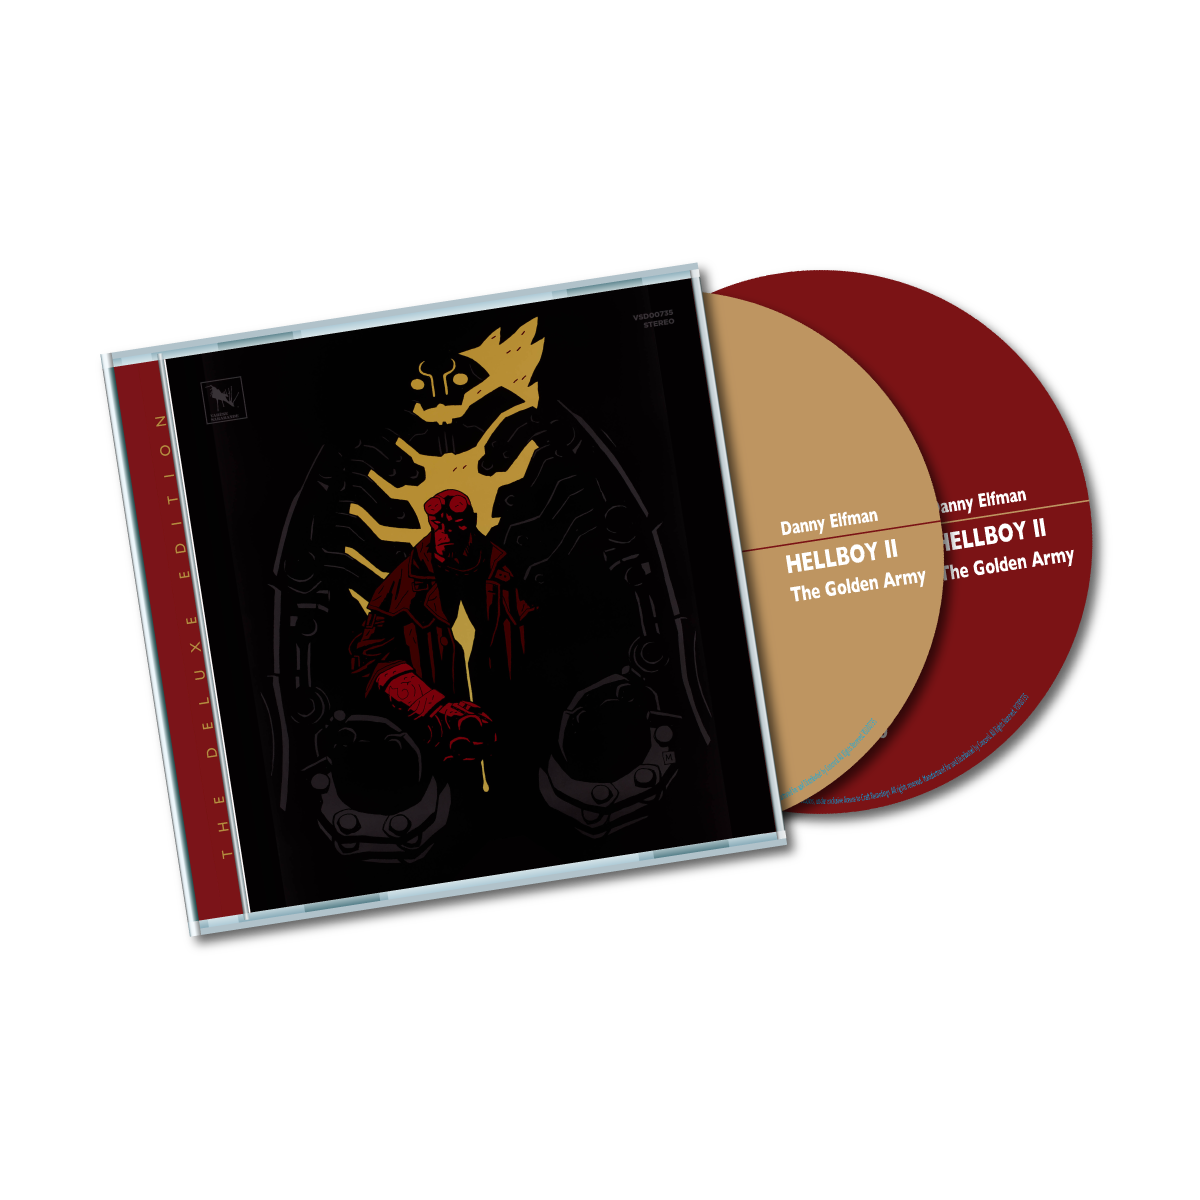 Danny Elfman – Hellboy 2: The Golden Army (Original Motion Picture Score - Deluxe Edition CD)